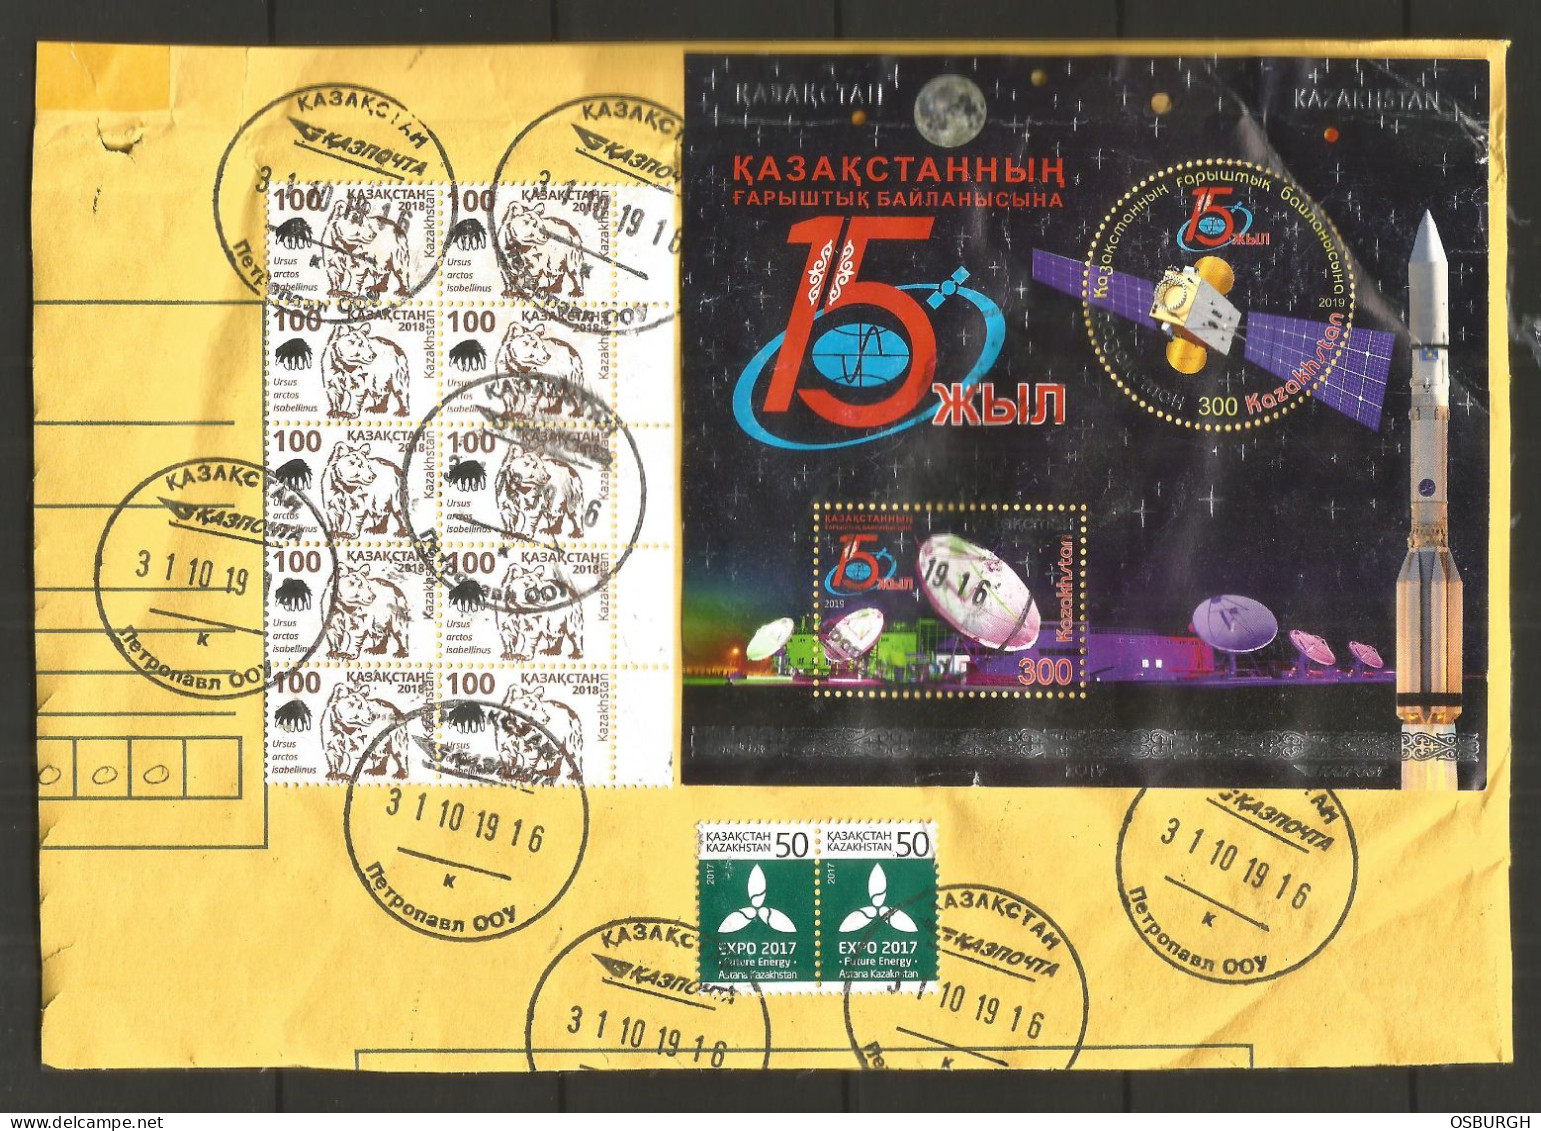 KAZAKHSTAN. SPACE STAMPS USED ON PIECE. - Kasachstan